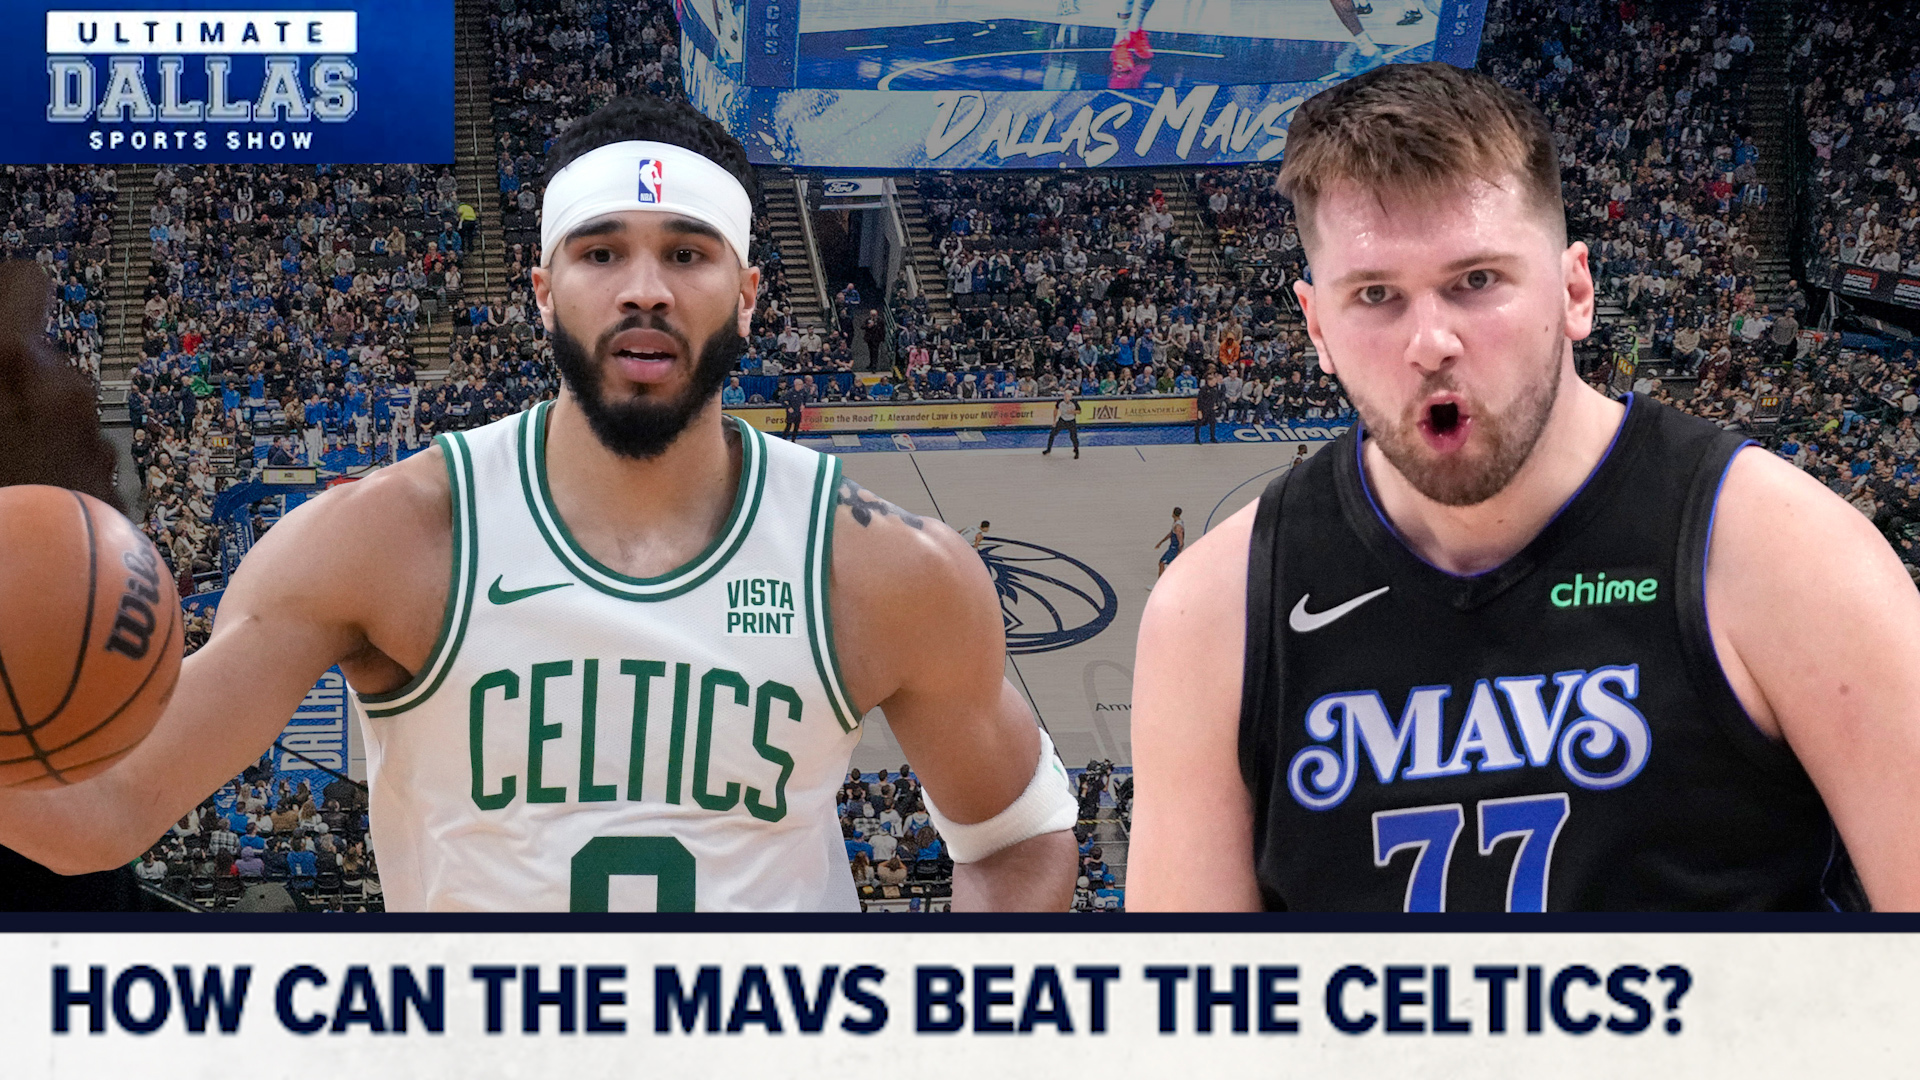 The Mavericks prepare for the third ever NBA Finals appearance, this time against the Celtics. How can Dallas take down Boston?